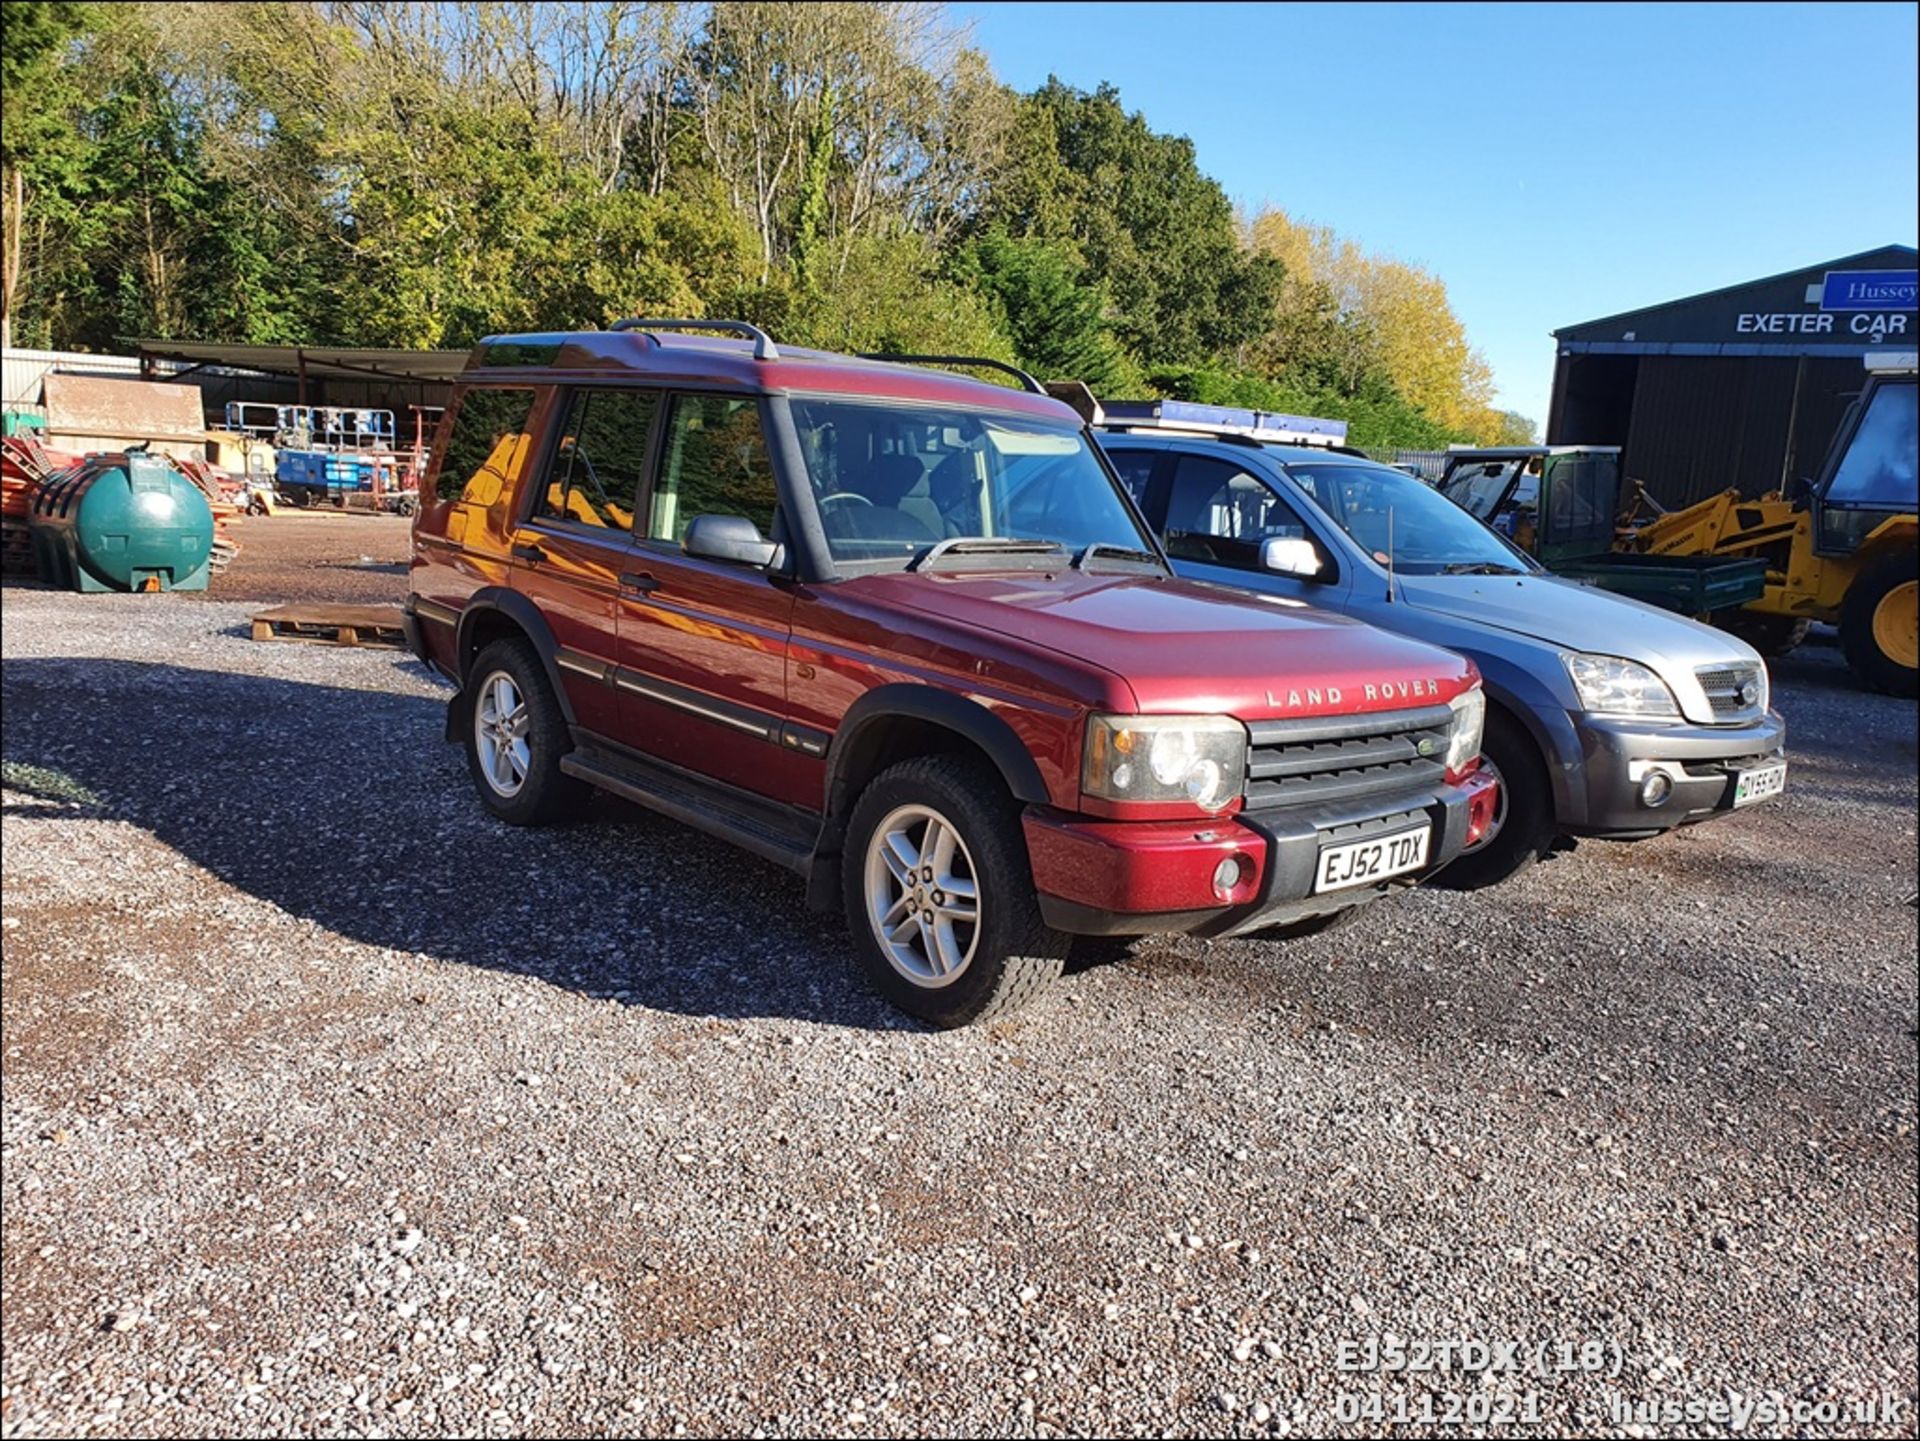 03/52 LAND ROVER DISCOVERY TD5 XS AUTO - 2495cc 5dr Estate (Red, 152k) - Image 18 of 18